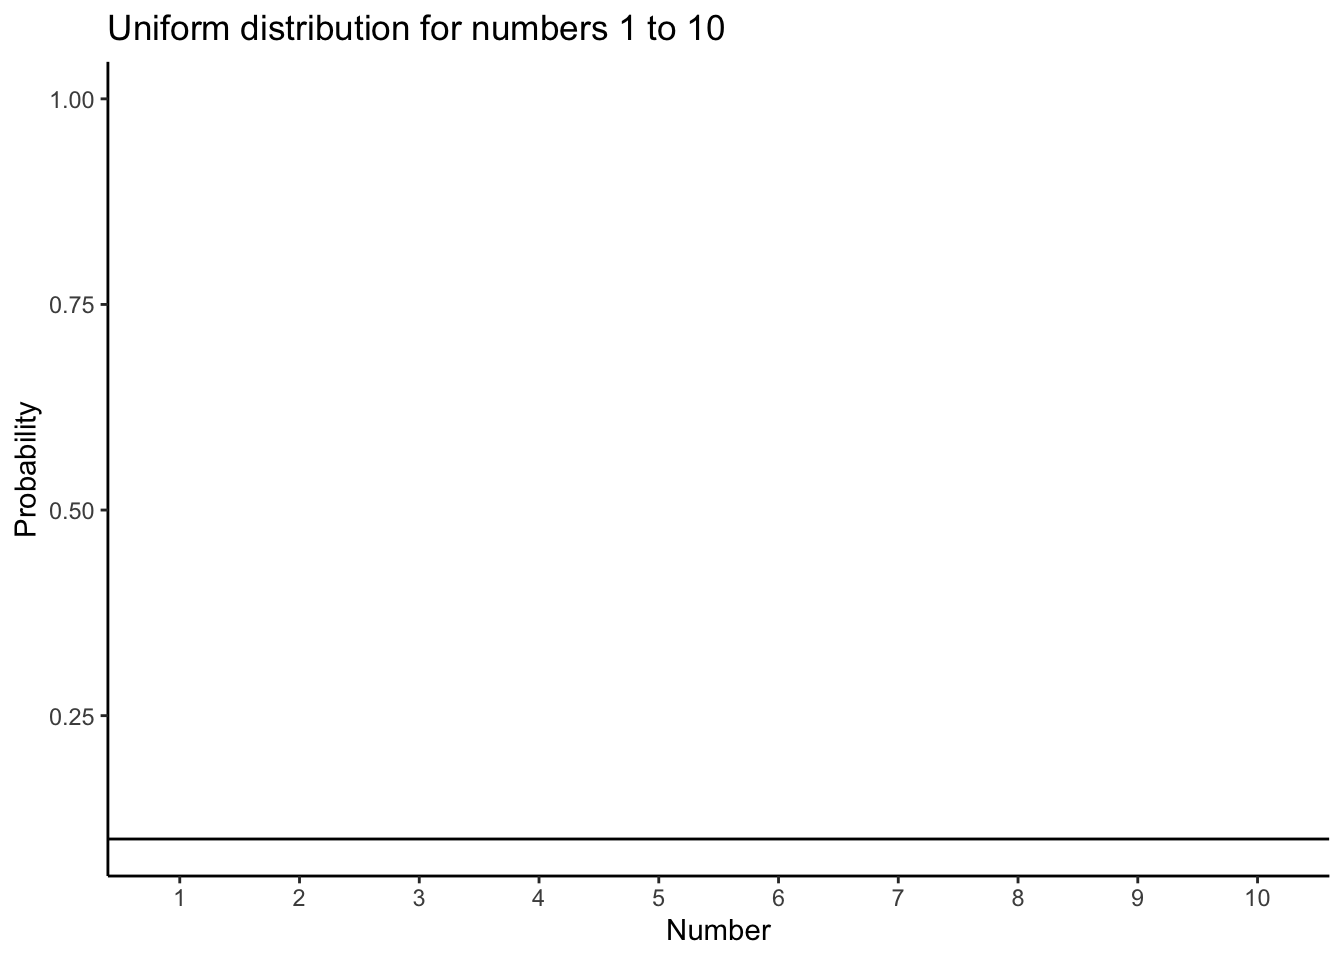 A uniform distribution illustrating the probabilites of sampling the numbers 1 to 10. In a uniform distribution, all numbers have an equal probability of being sampled, so the line is flat indicating all numbers have the same probability